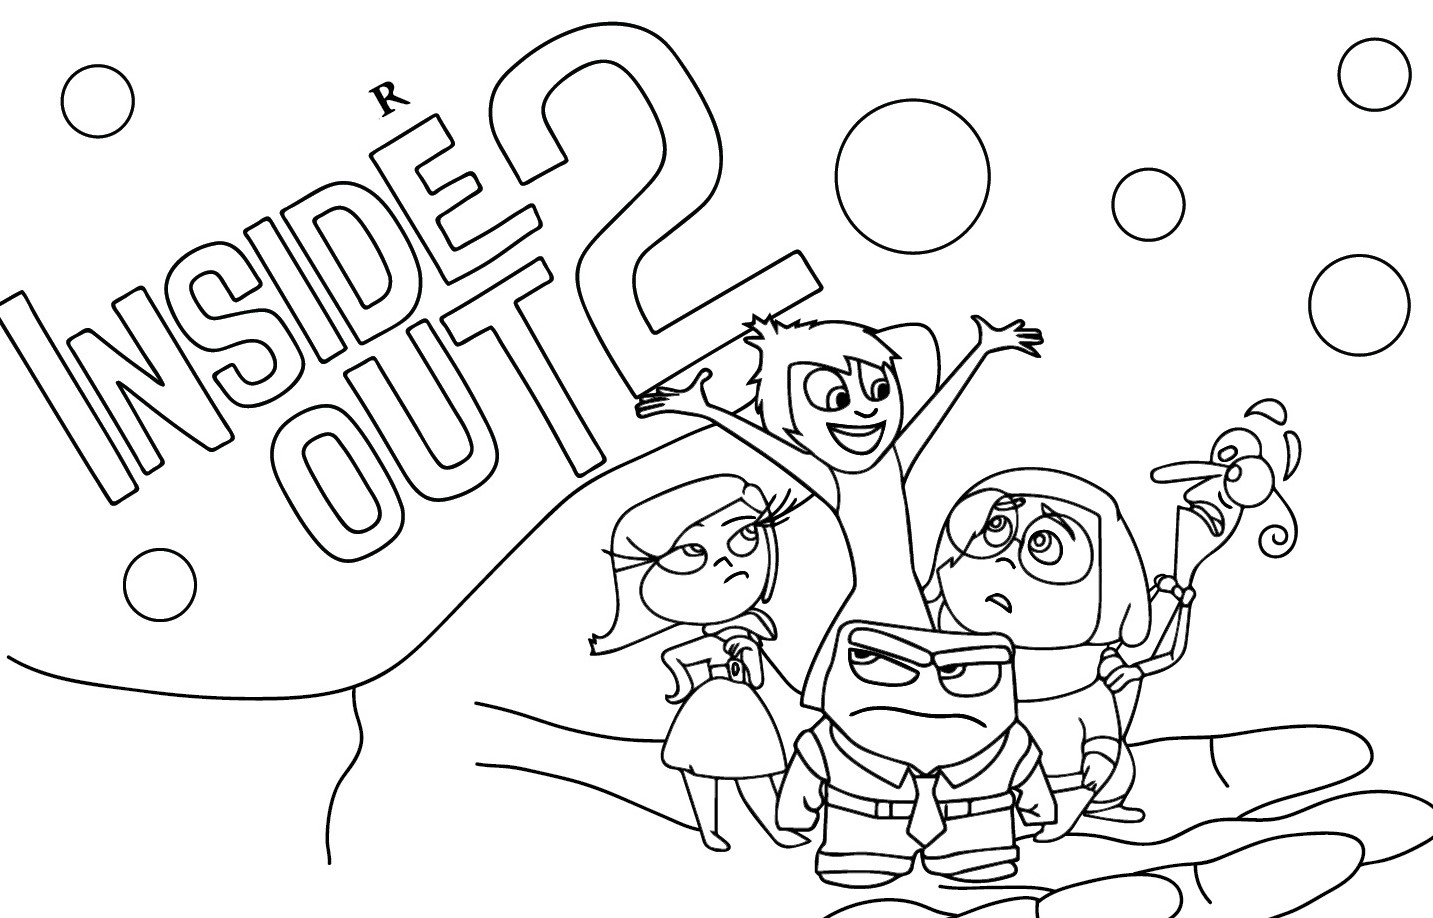 Inside out coloring pages - Coloring ...